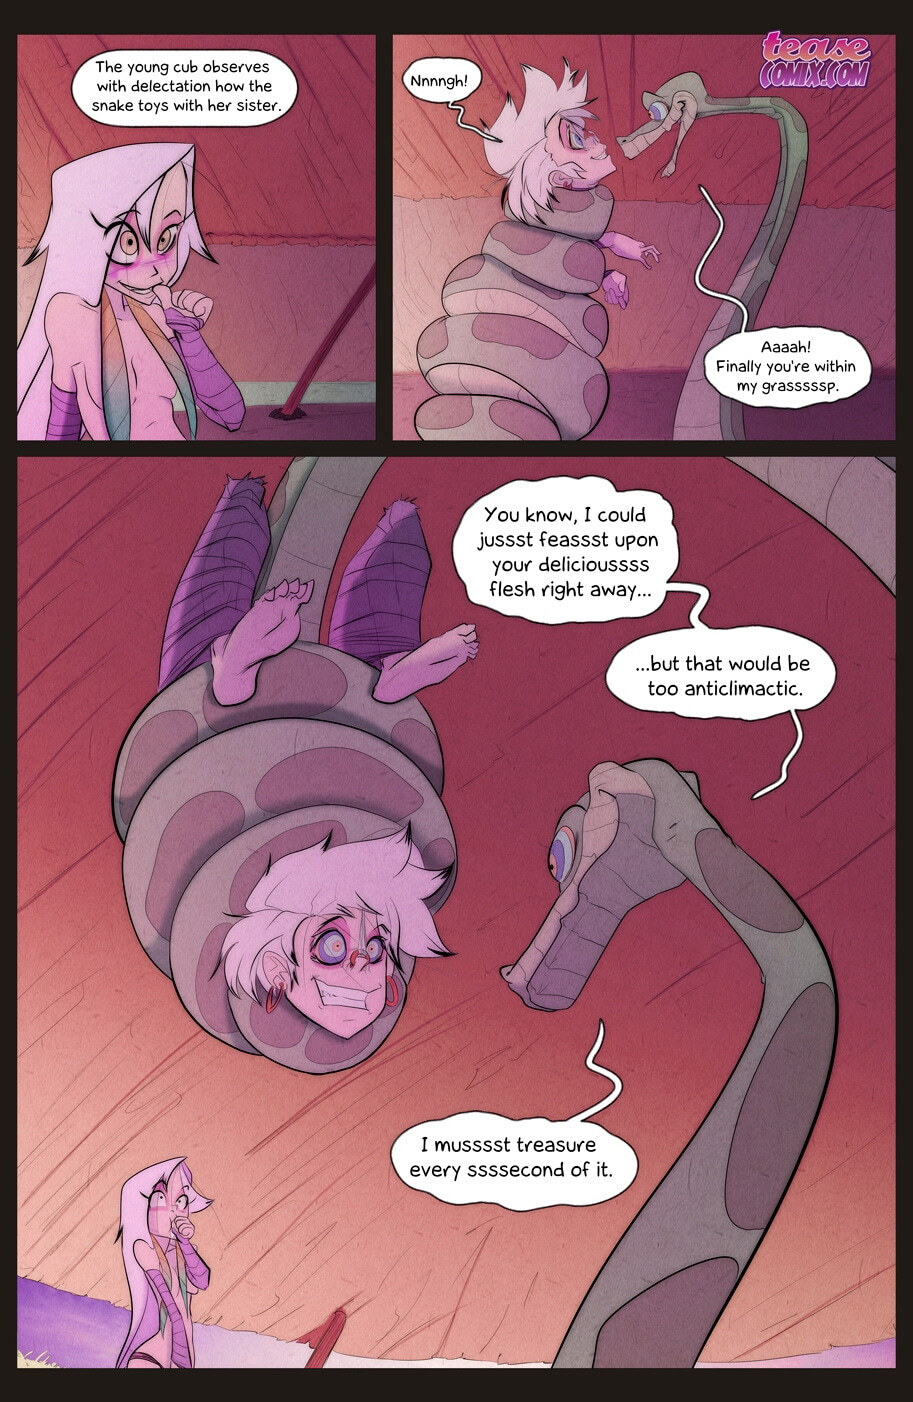 The Snake and The Girl 5 - Page 6